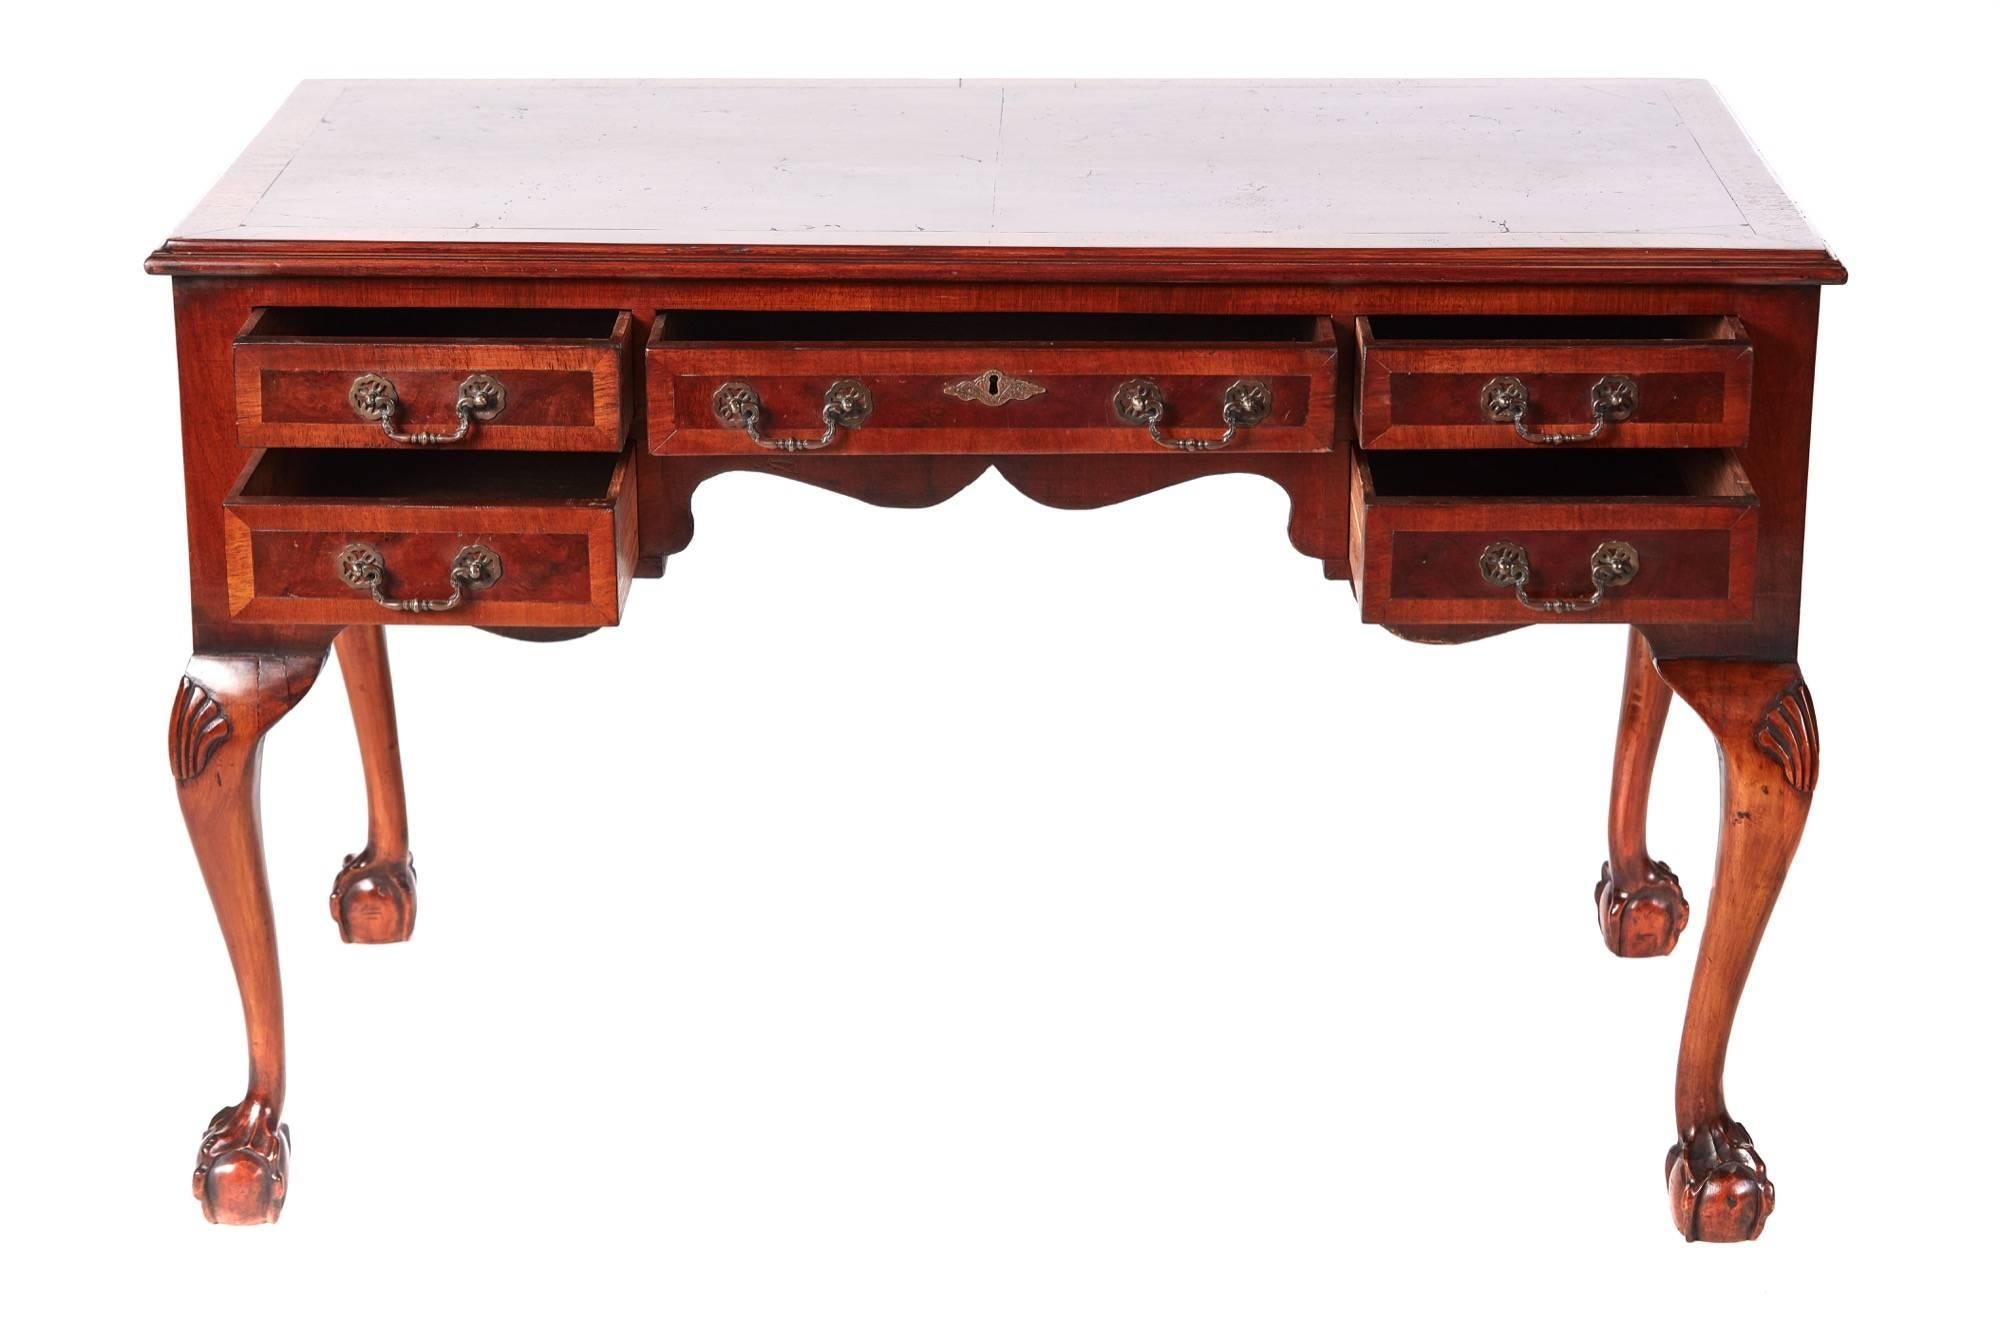 Antique burr walnut freestanding writing desk, having a lovely burr walnut crossbanded top, five crossbanded walnut drawers all with original brass handles, standing on shaped carved cabriole legs with claw and ball feet
Lovely color and